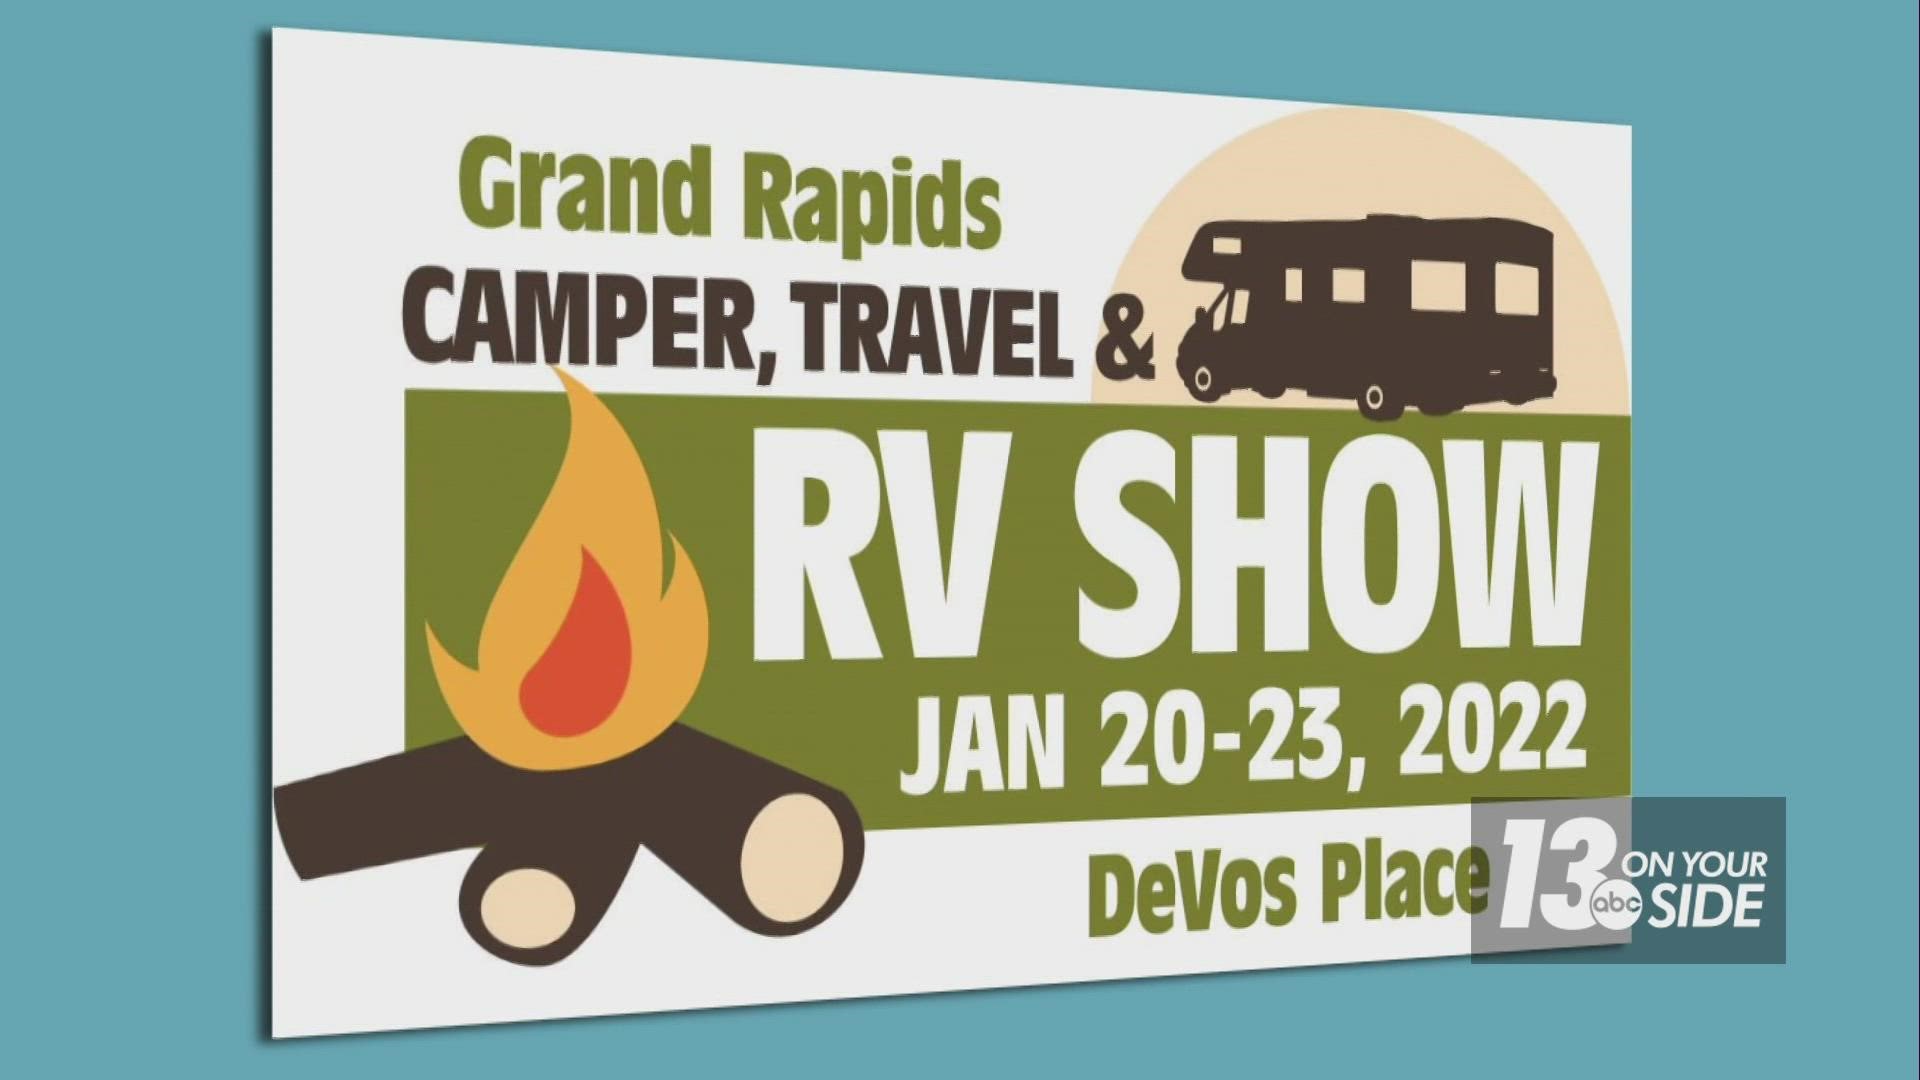 Camper, Travel & RV Show offers special show pricing